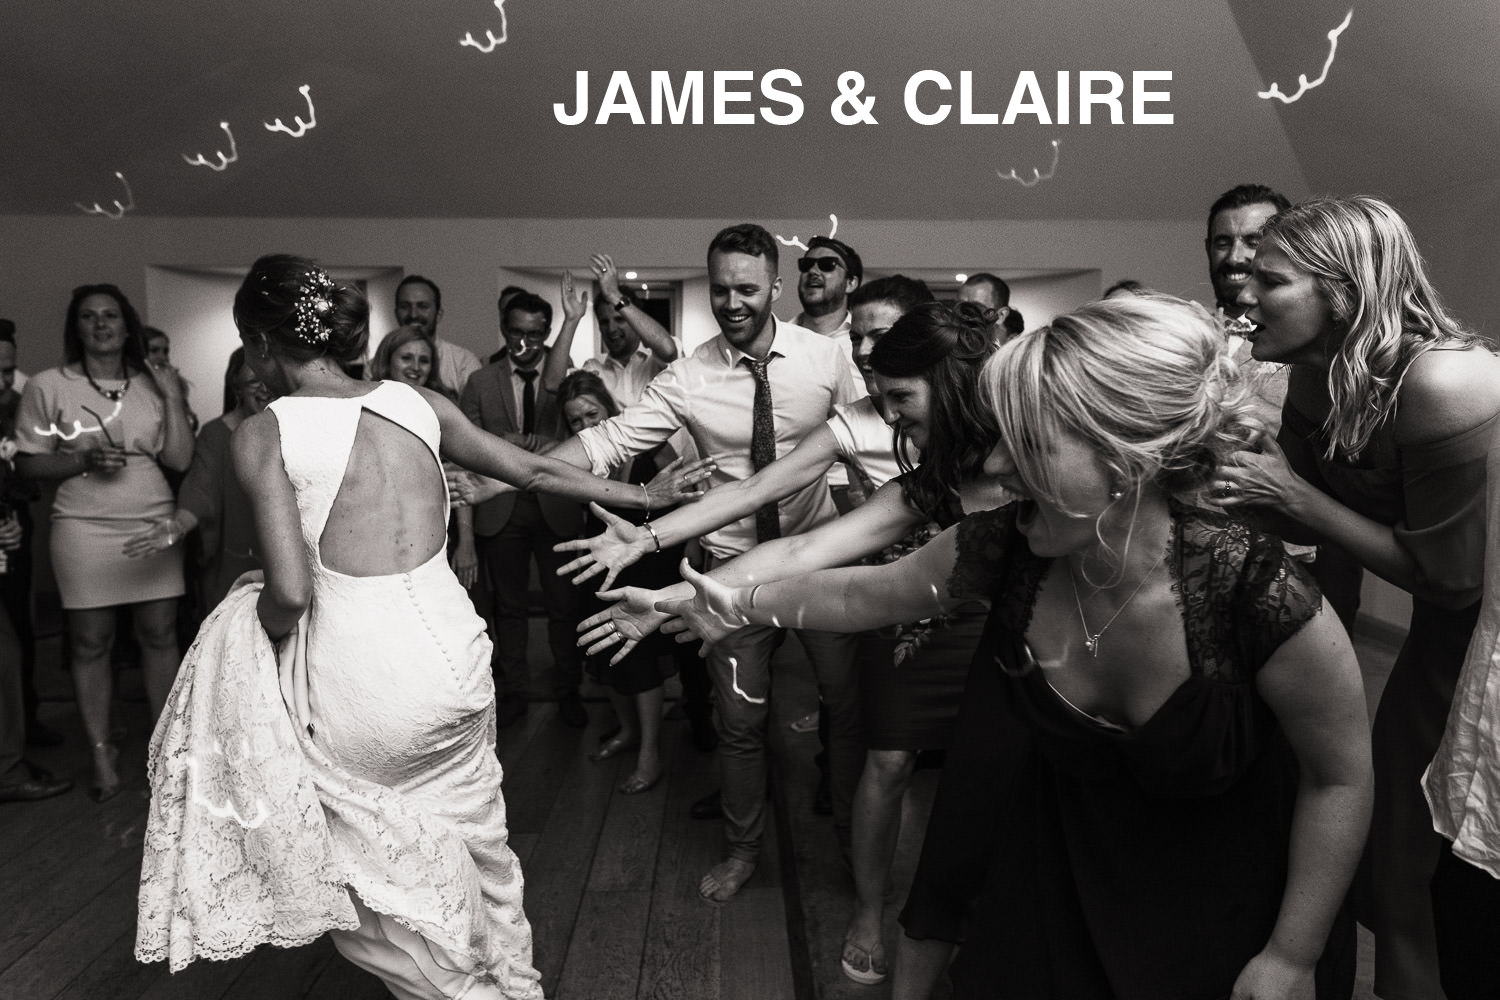 Wedding photography at Houchins wedding venue in Essex. A bride runs around the dance floor as the guests reach out their hands.